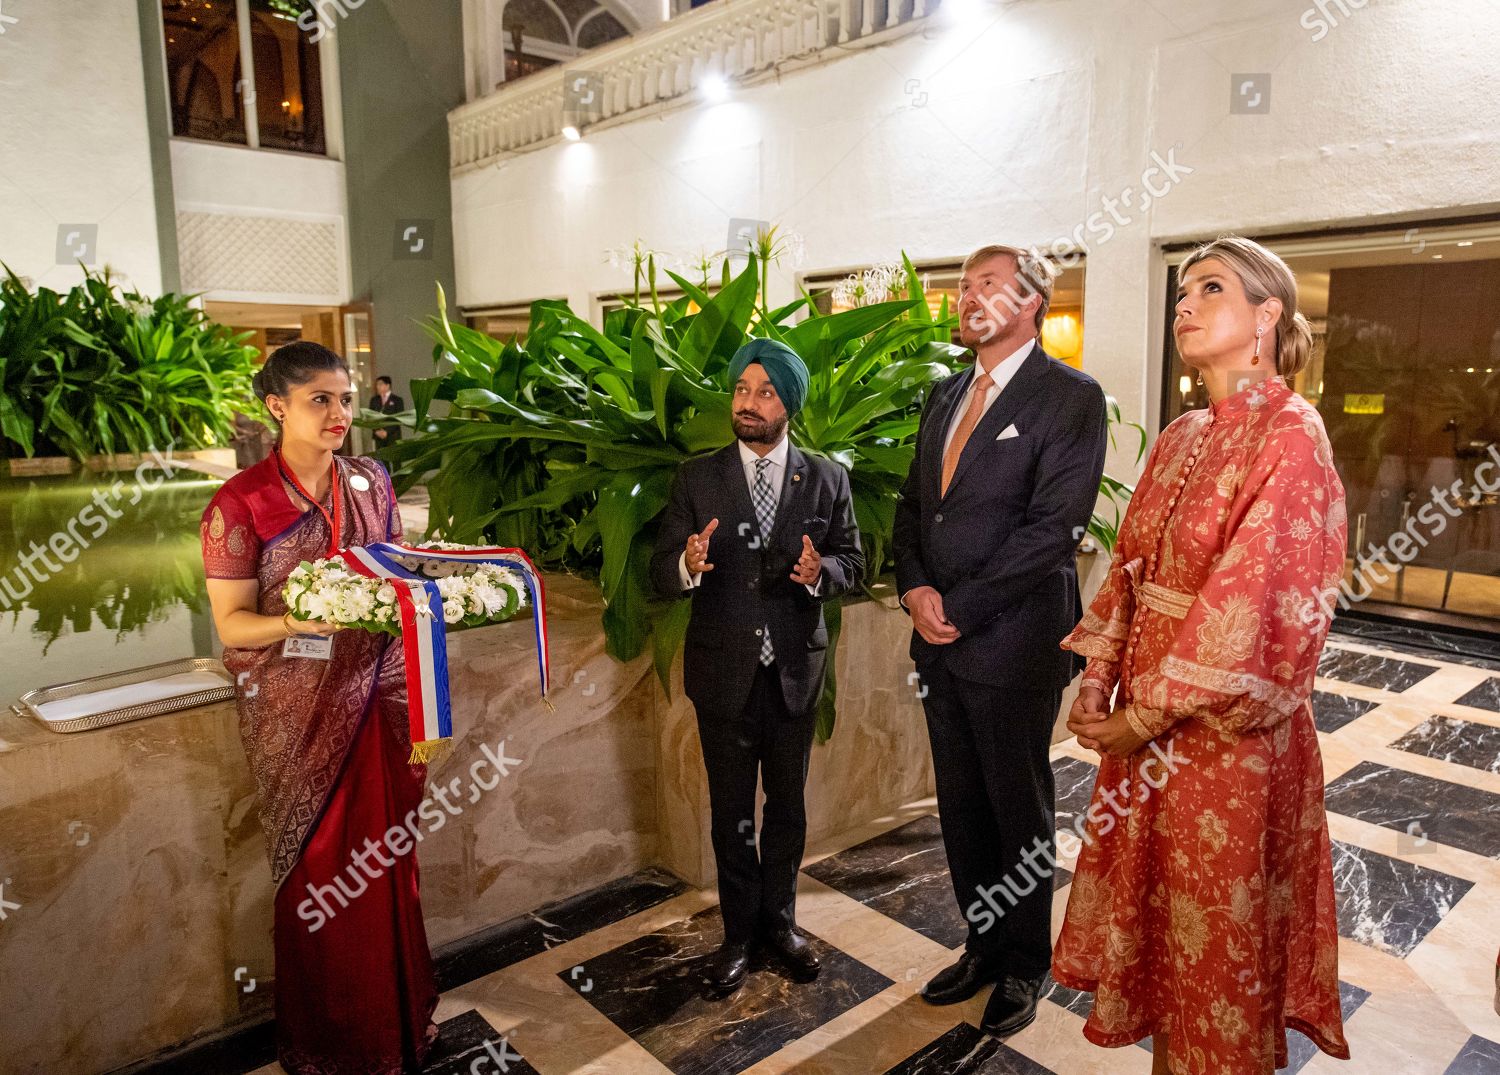 dutch-royals-state-visit-to-india-shutterstock-editorial-10445503bw.jpg